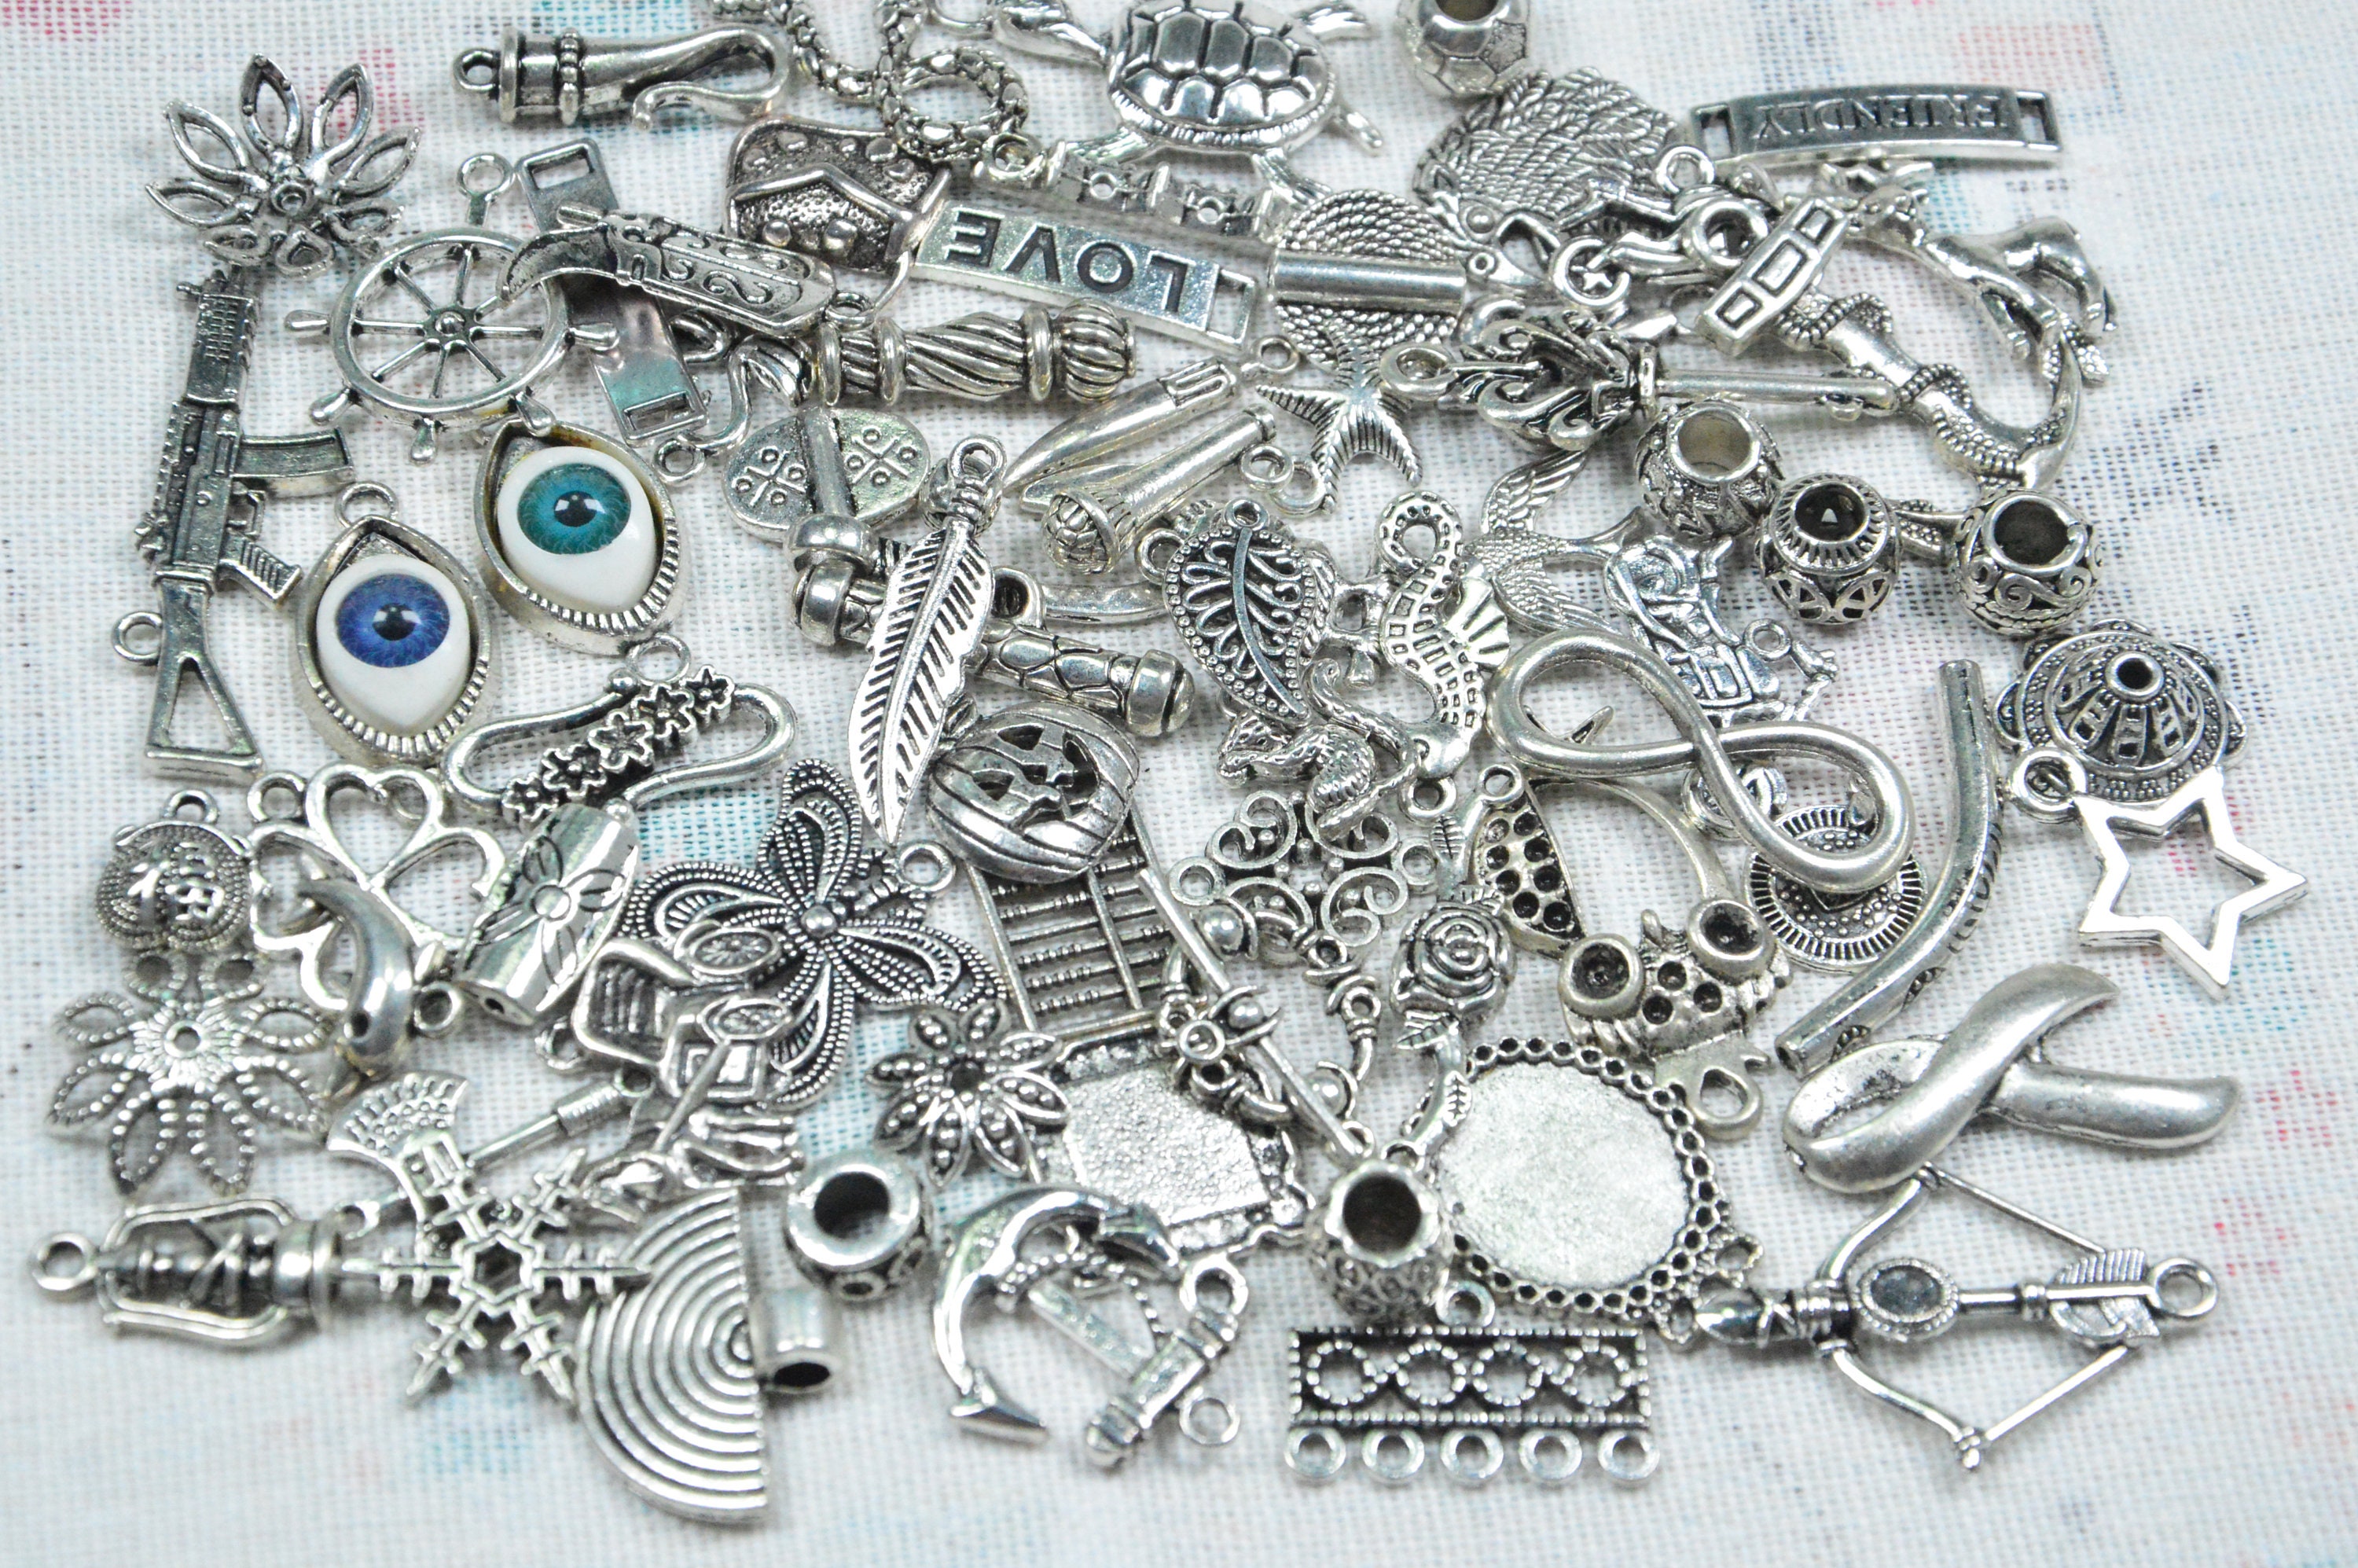 Incraftables 100pcs Gold Charms for Jewelry Making with 15pcs Clasps &  Rings. Best Antique Metal Designer Charm for DIY Bracelets & Necklaces.  Bulk Assorted Charms for Bracelet & Crafting Supplies